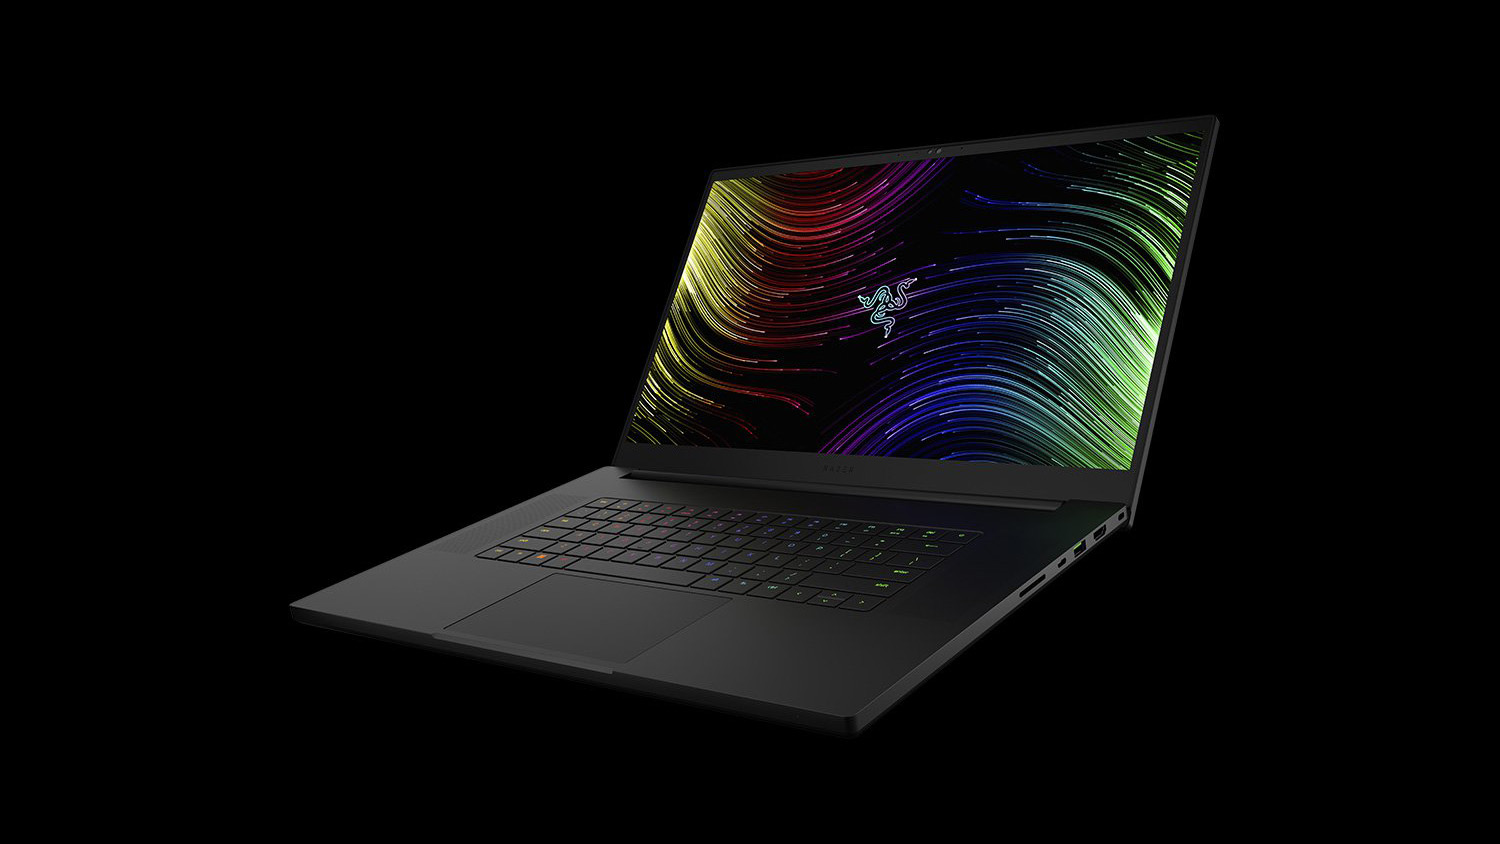 Product shot of the Razer Blade 17 laptop on a black background.